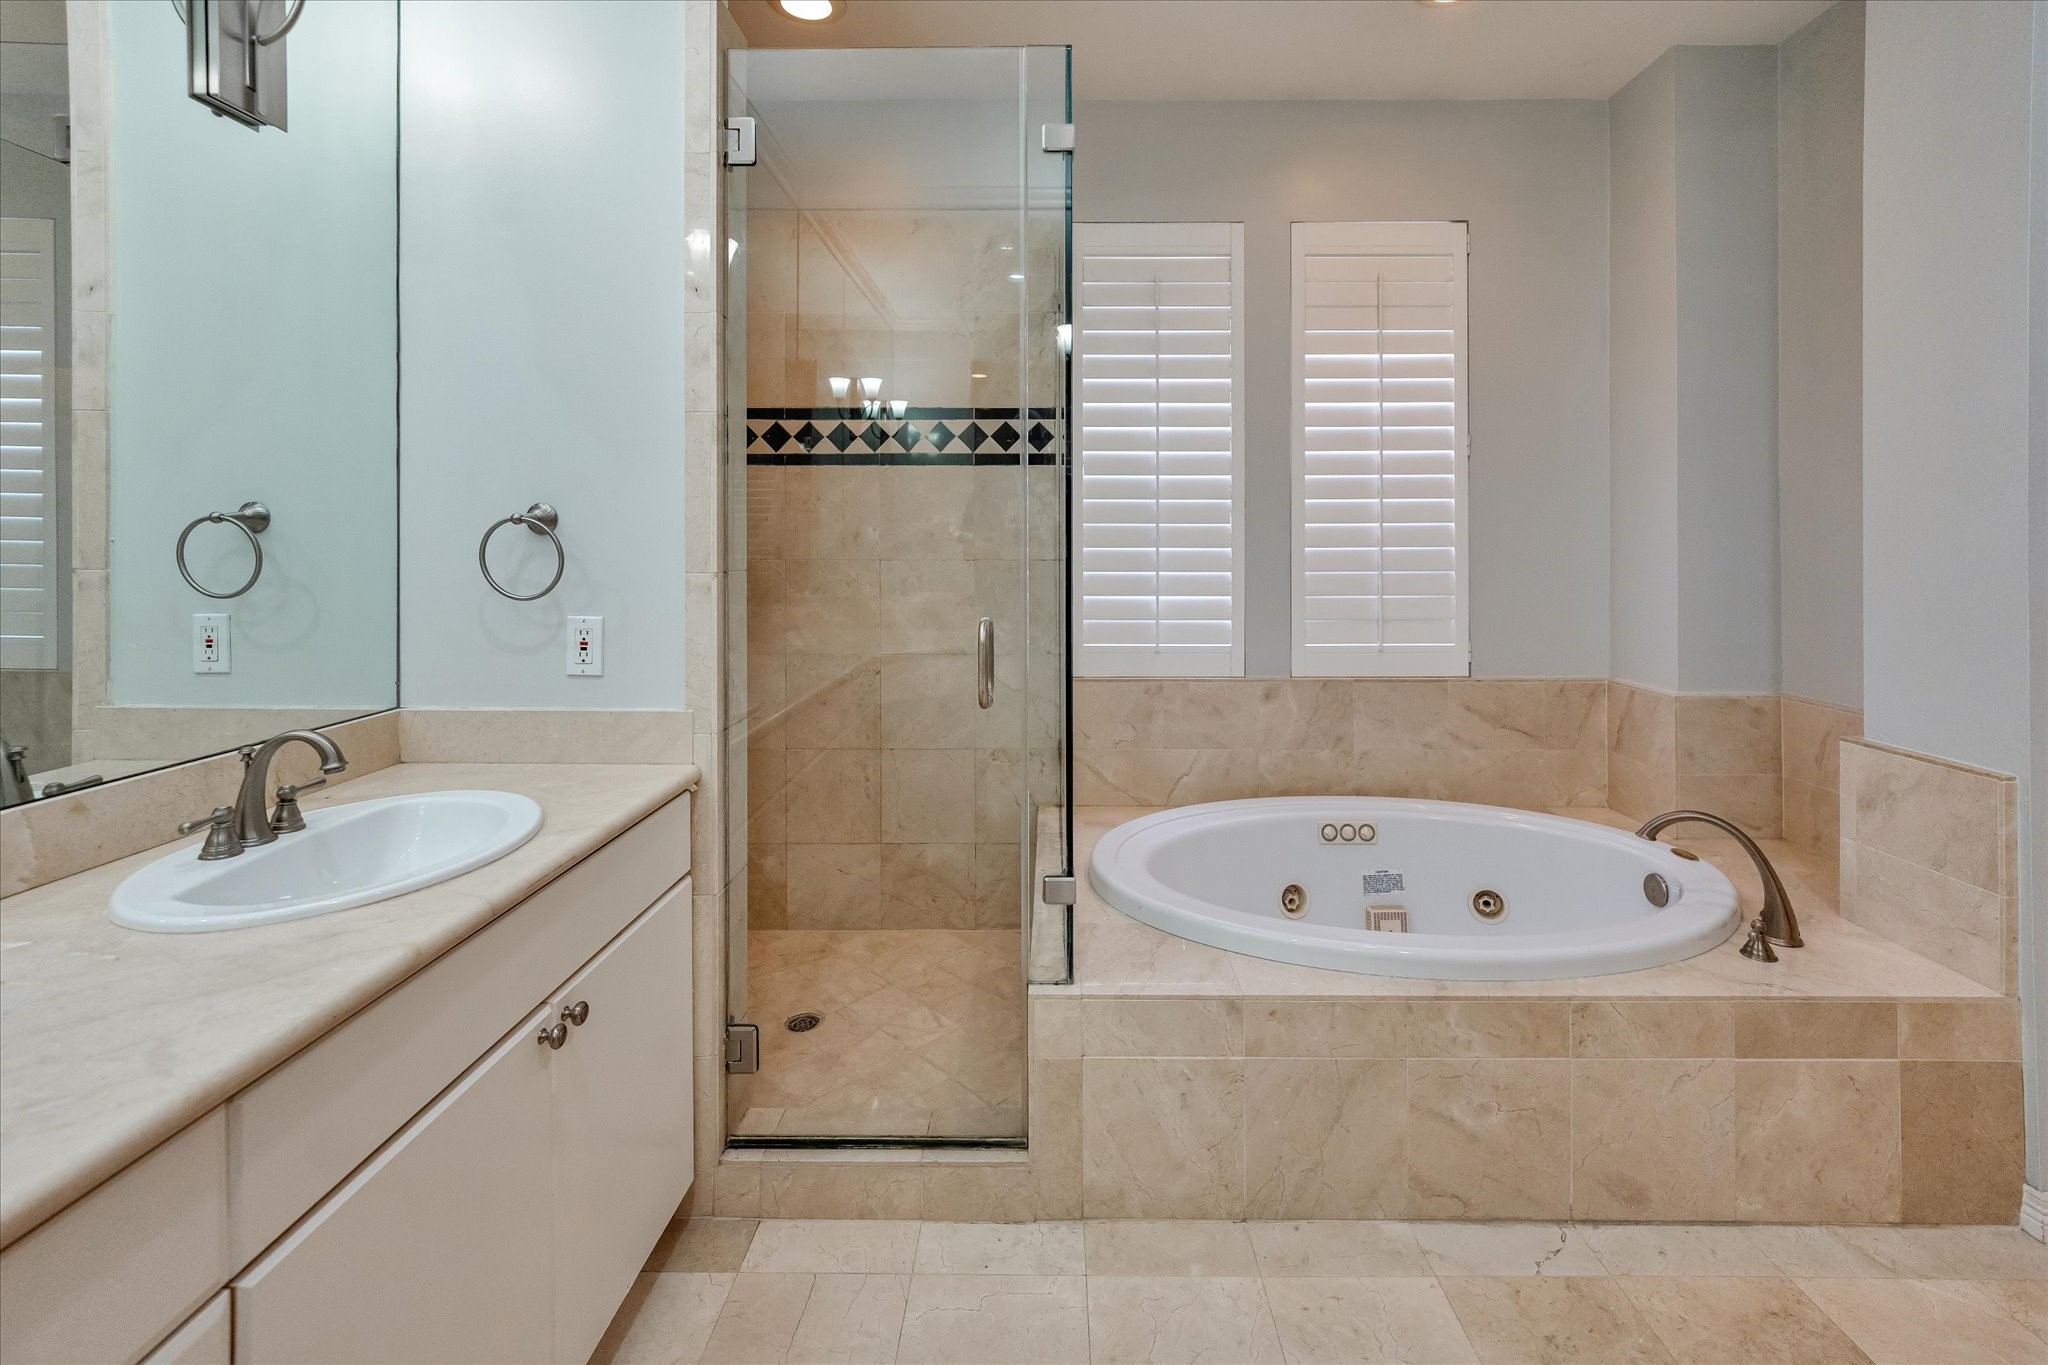 A closer view of your seamless glass walk-in shower and sizable jetted tub, with privacy shuttered windows.